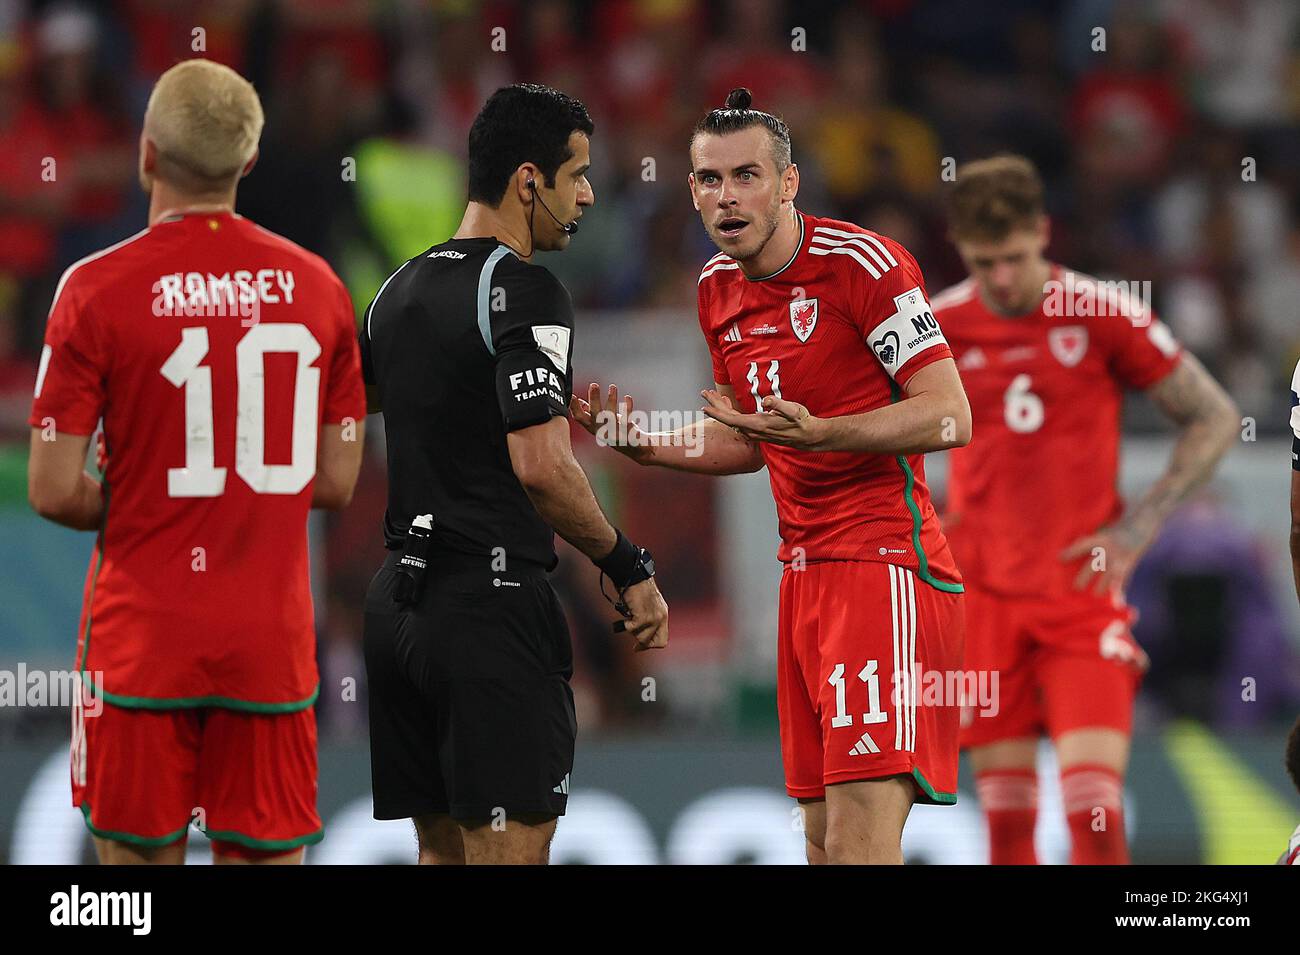 Al-Rayyan, Qatar. 21st Nov, 2022. Al Rayyan, Qatar. 21st Nov, 2022. AL-RAYYAN, AR - 21.11.2022: USA VS WALES - BALE Gareth of Wales and Referee Al Jassim Abdulrahman during a match between the United States and Wales, valid for the group stage of the World Cup, held at the Ahmed bin Ali Stadium in Al-Rayyan, Qatar. (Photo: Rodolfo Buhrer/La Imagem/Fotoarena) Credit: Foto Arena LTDA/Alamy Live News Credit: Foto Arena LTDA/Alamy Live News Credit: Foto Arena LTDA/Alamy Live News Stock Photo